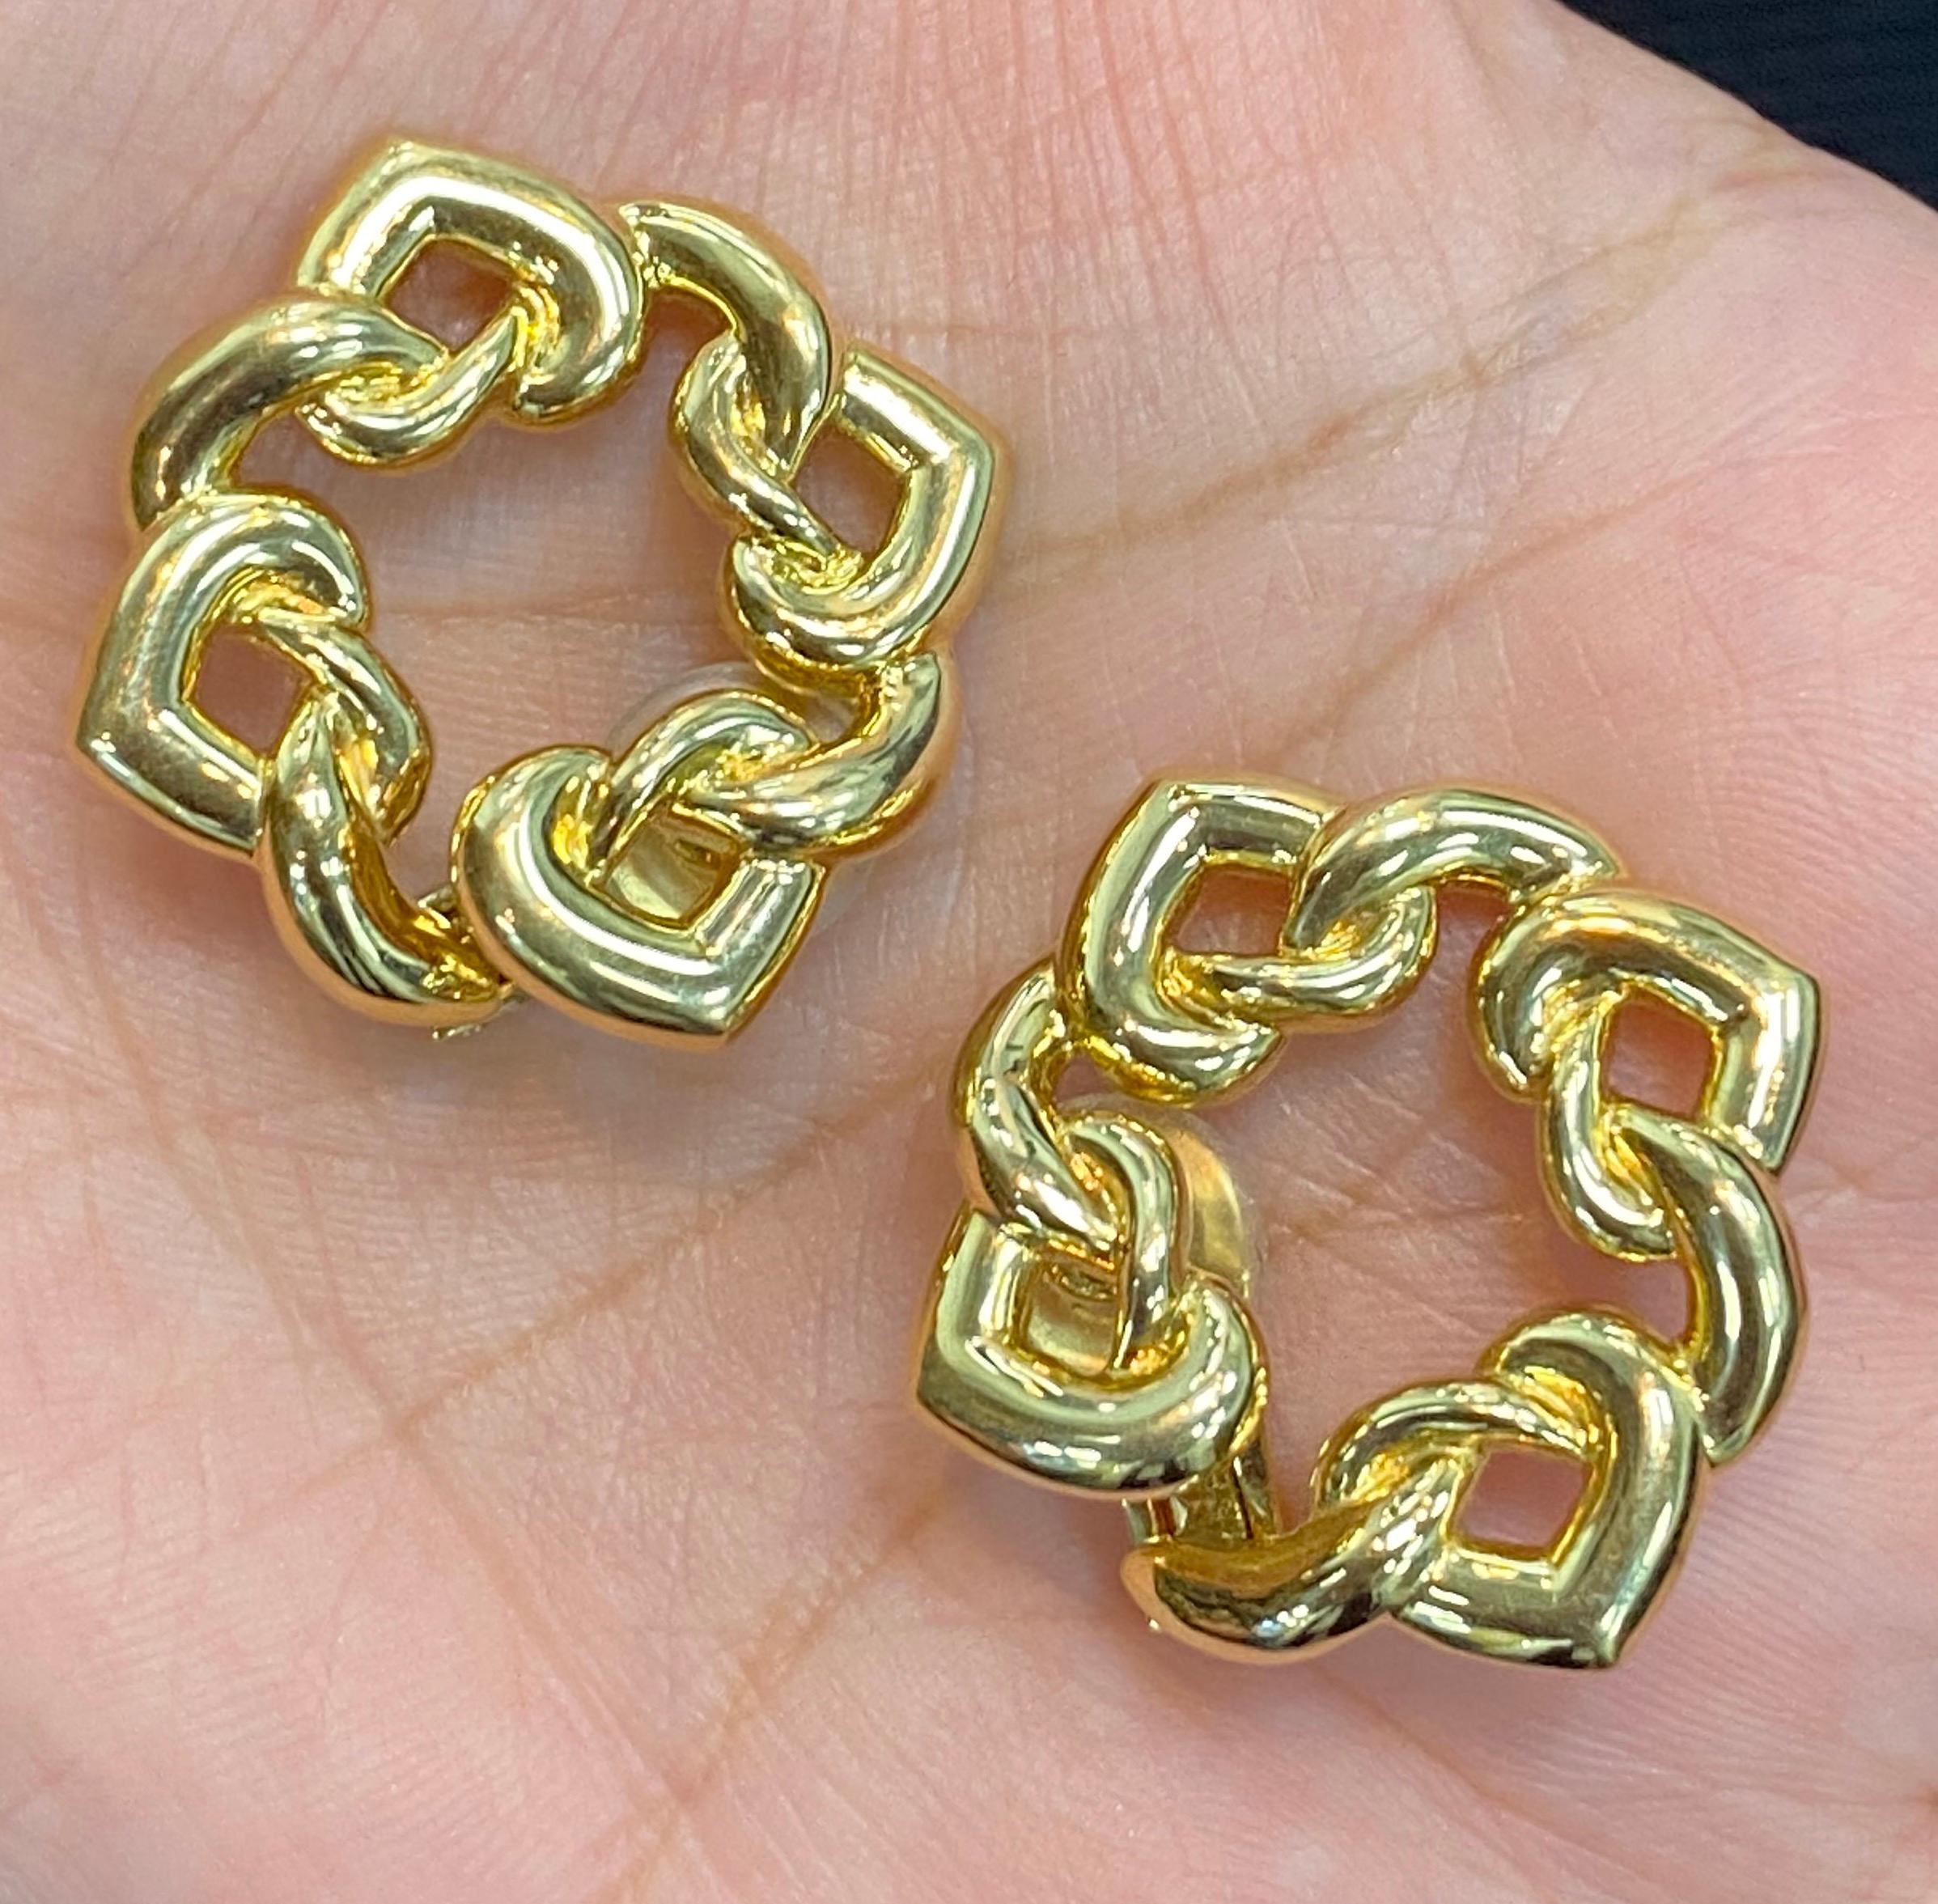 Bulgari Doppio Cuore Gold Earrings In Excellent Condition For Sale In New York, NY